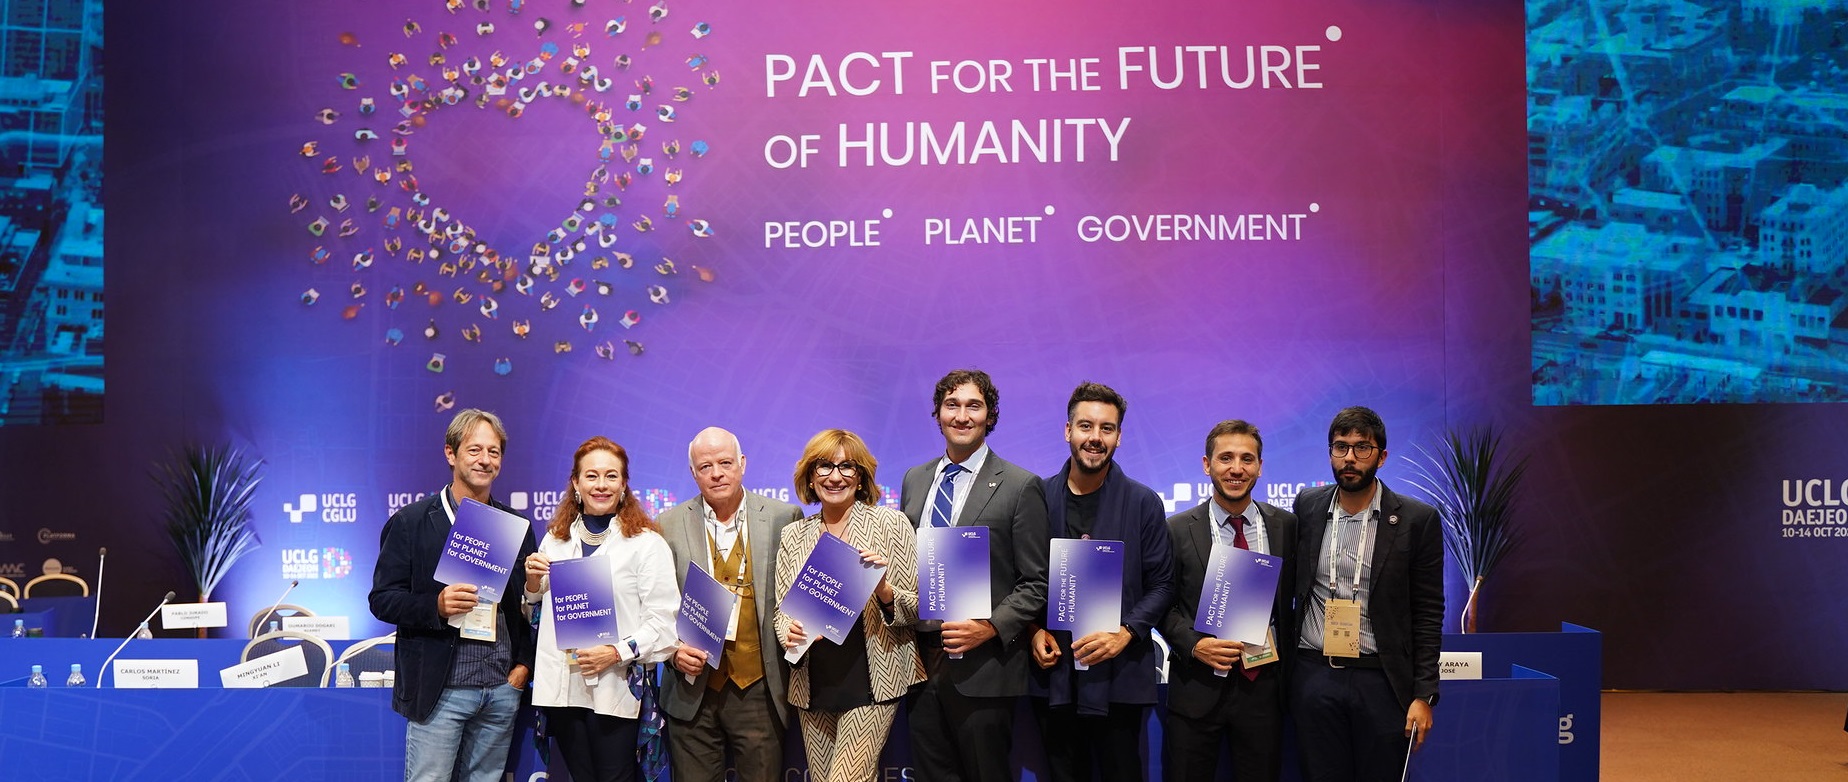 Pact for the Future of Humanity